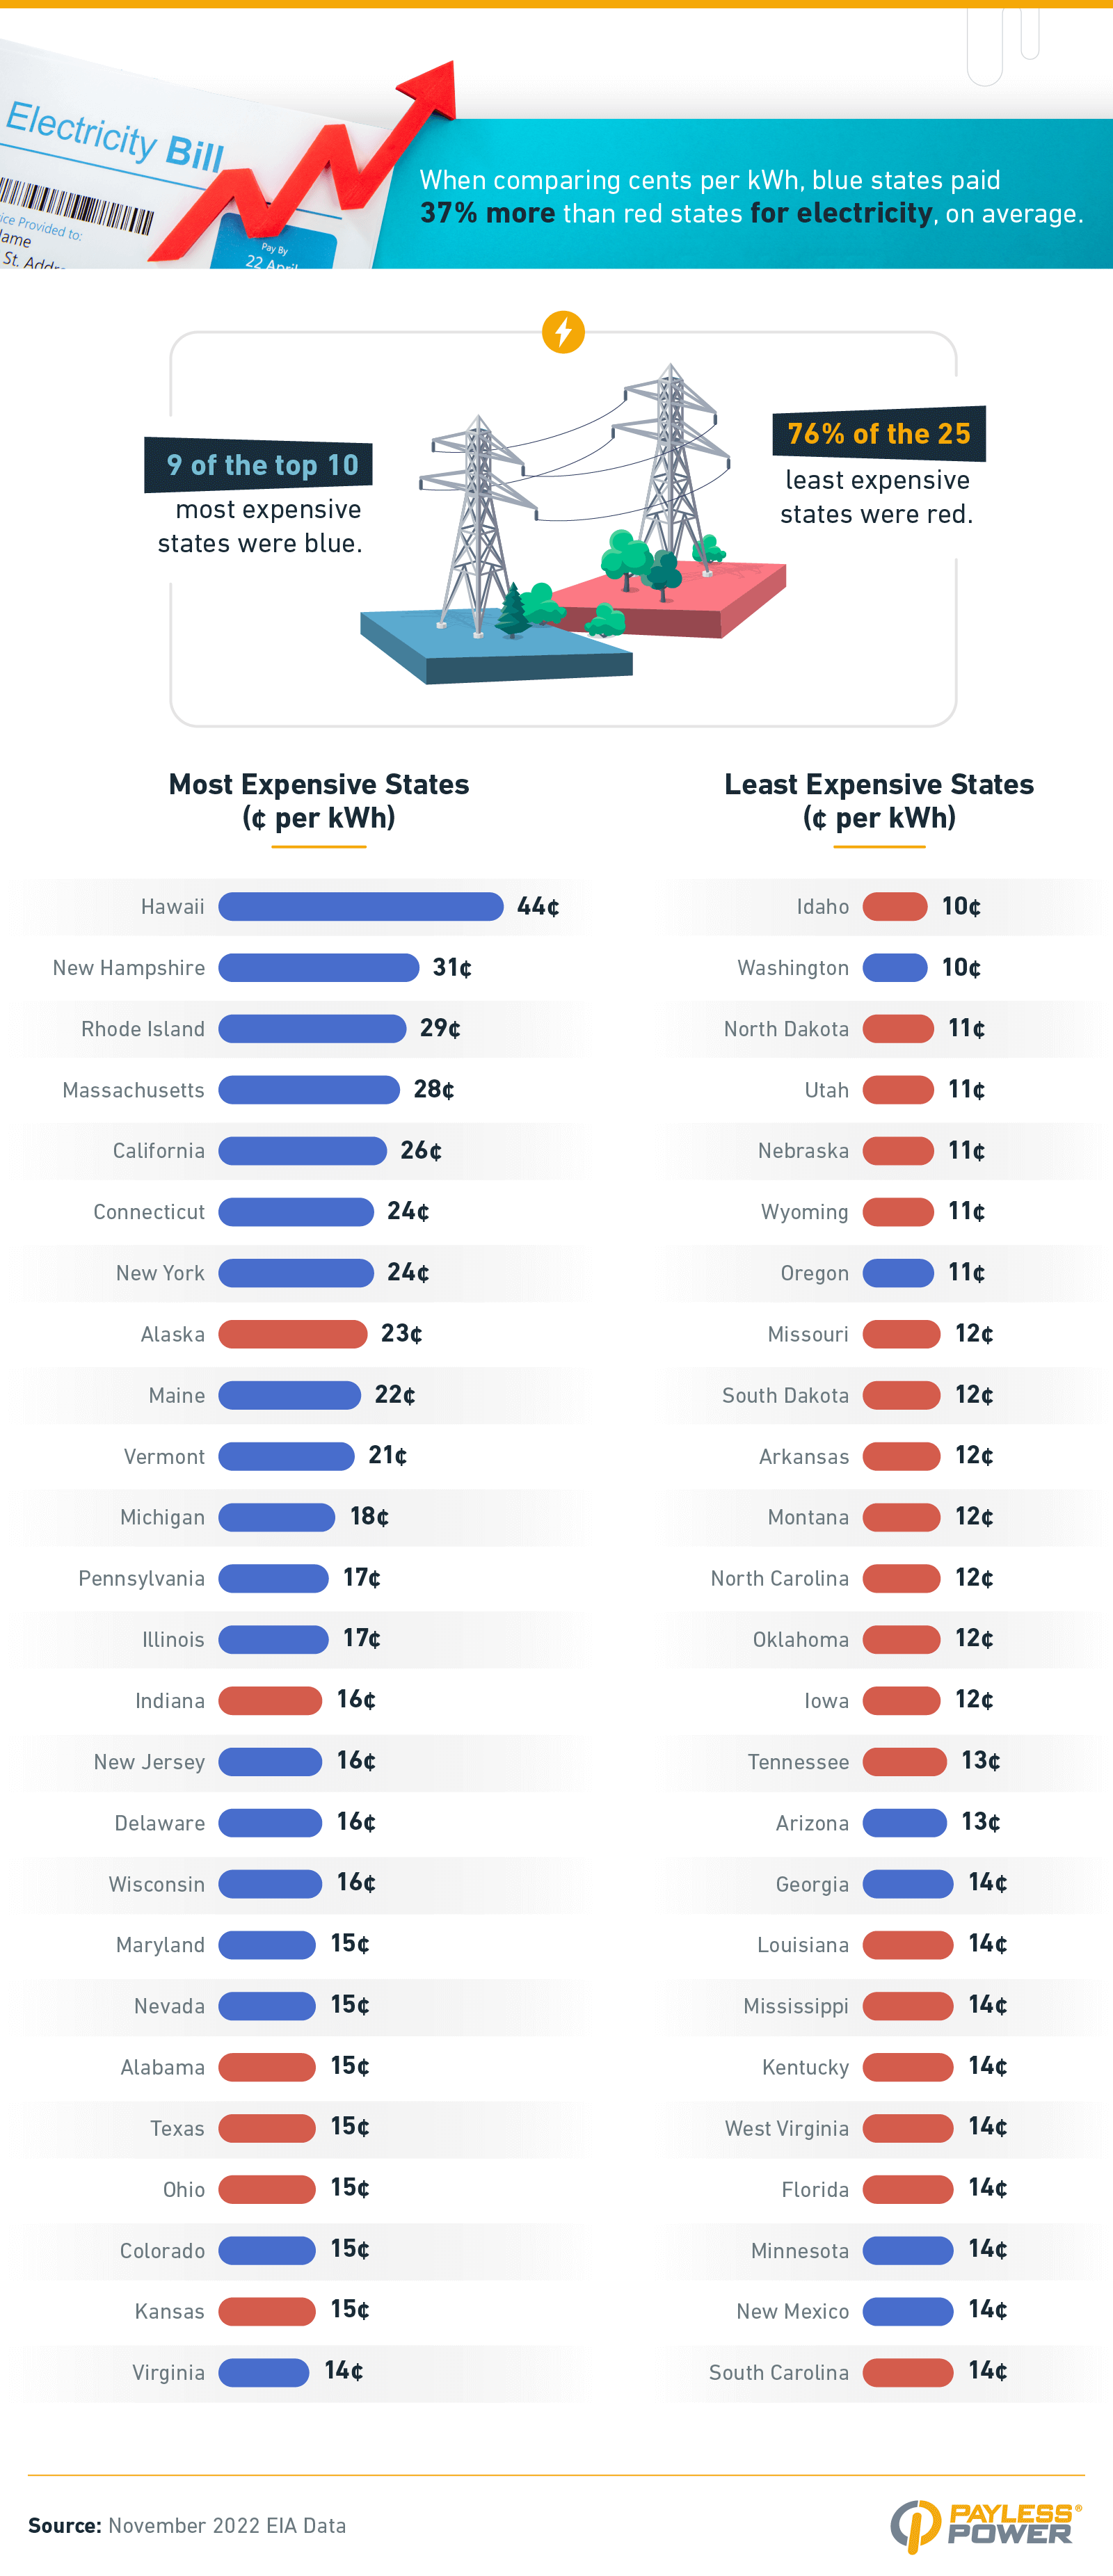 Infographic that explores the most and least expensive states for electricity while comparing the state's political standing.